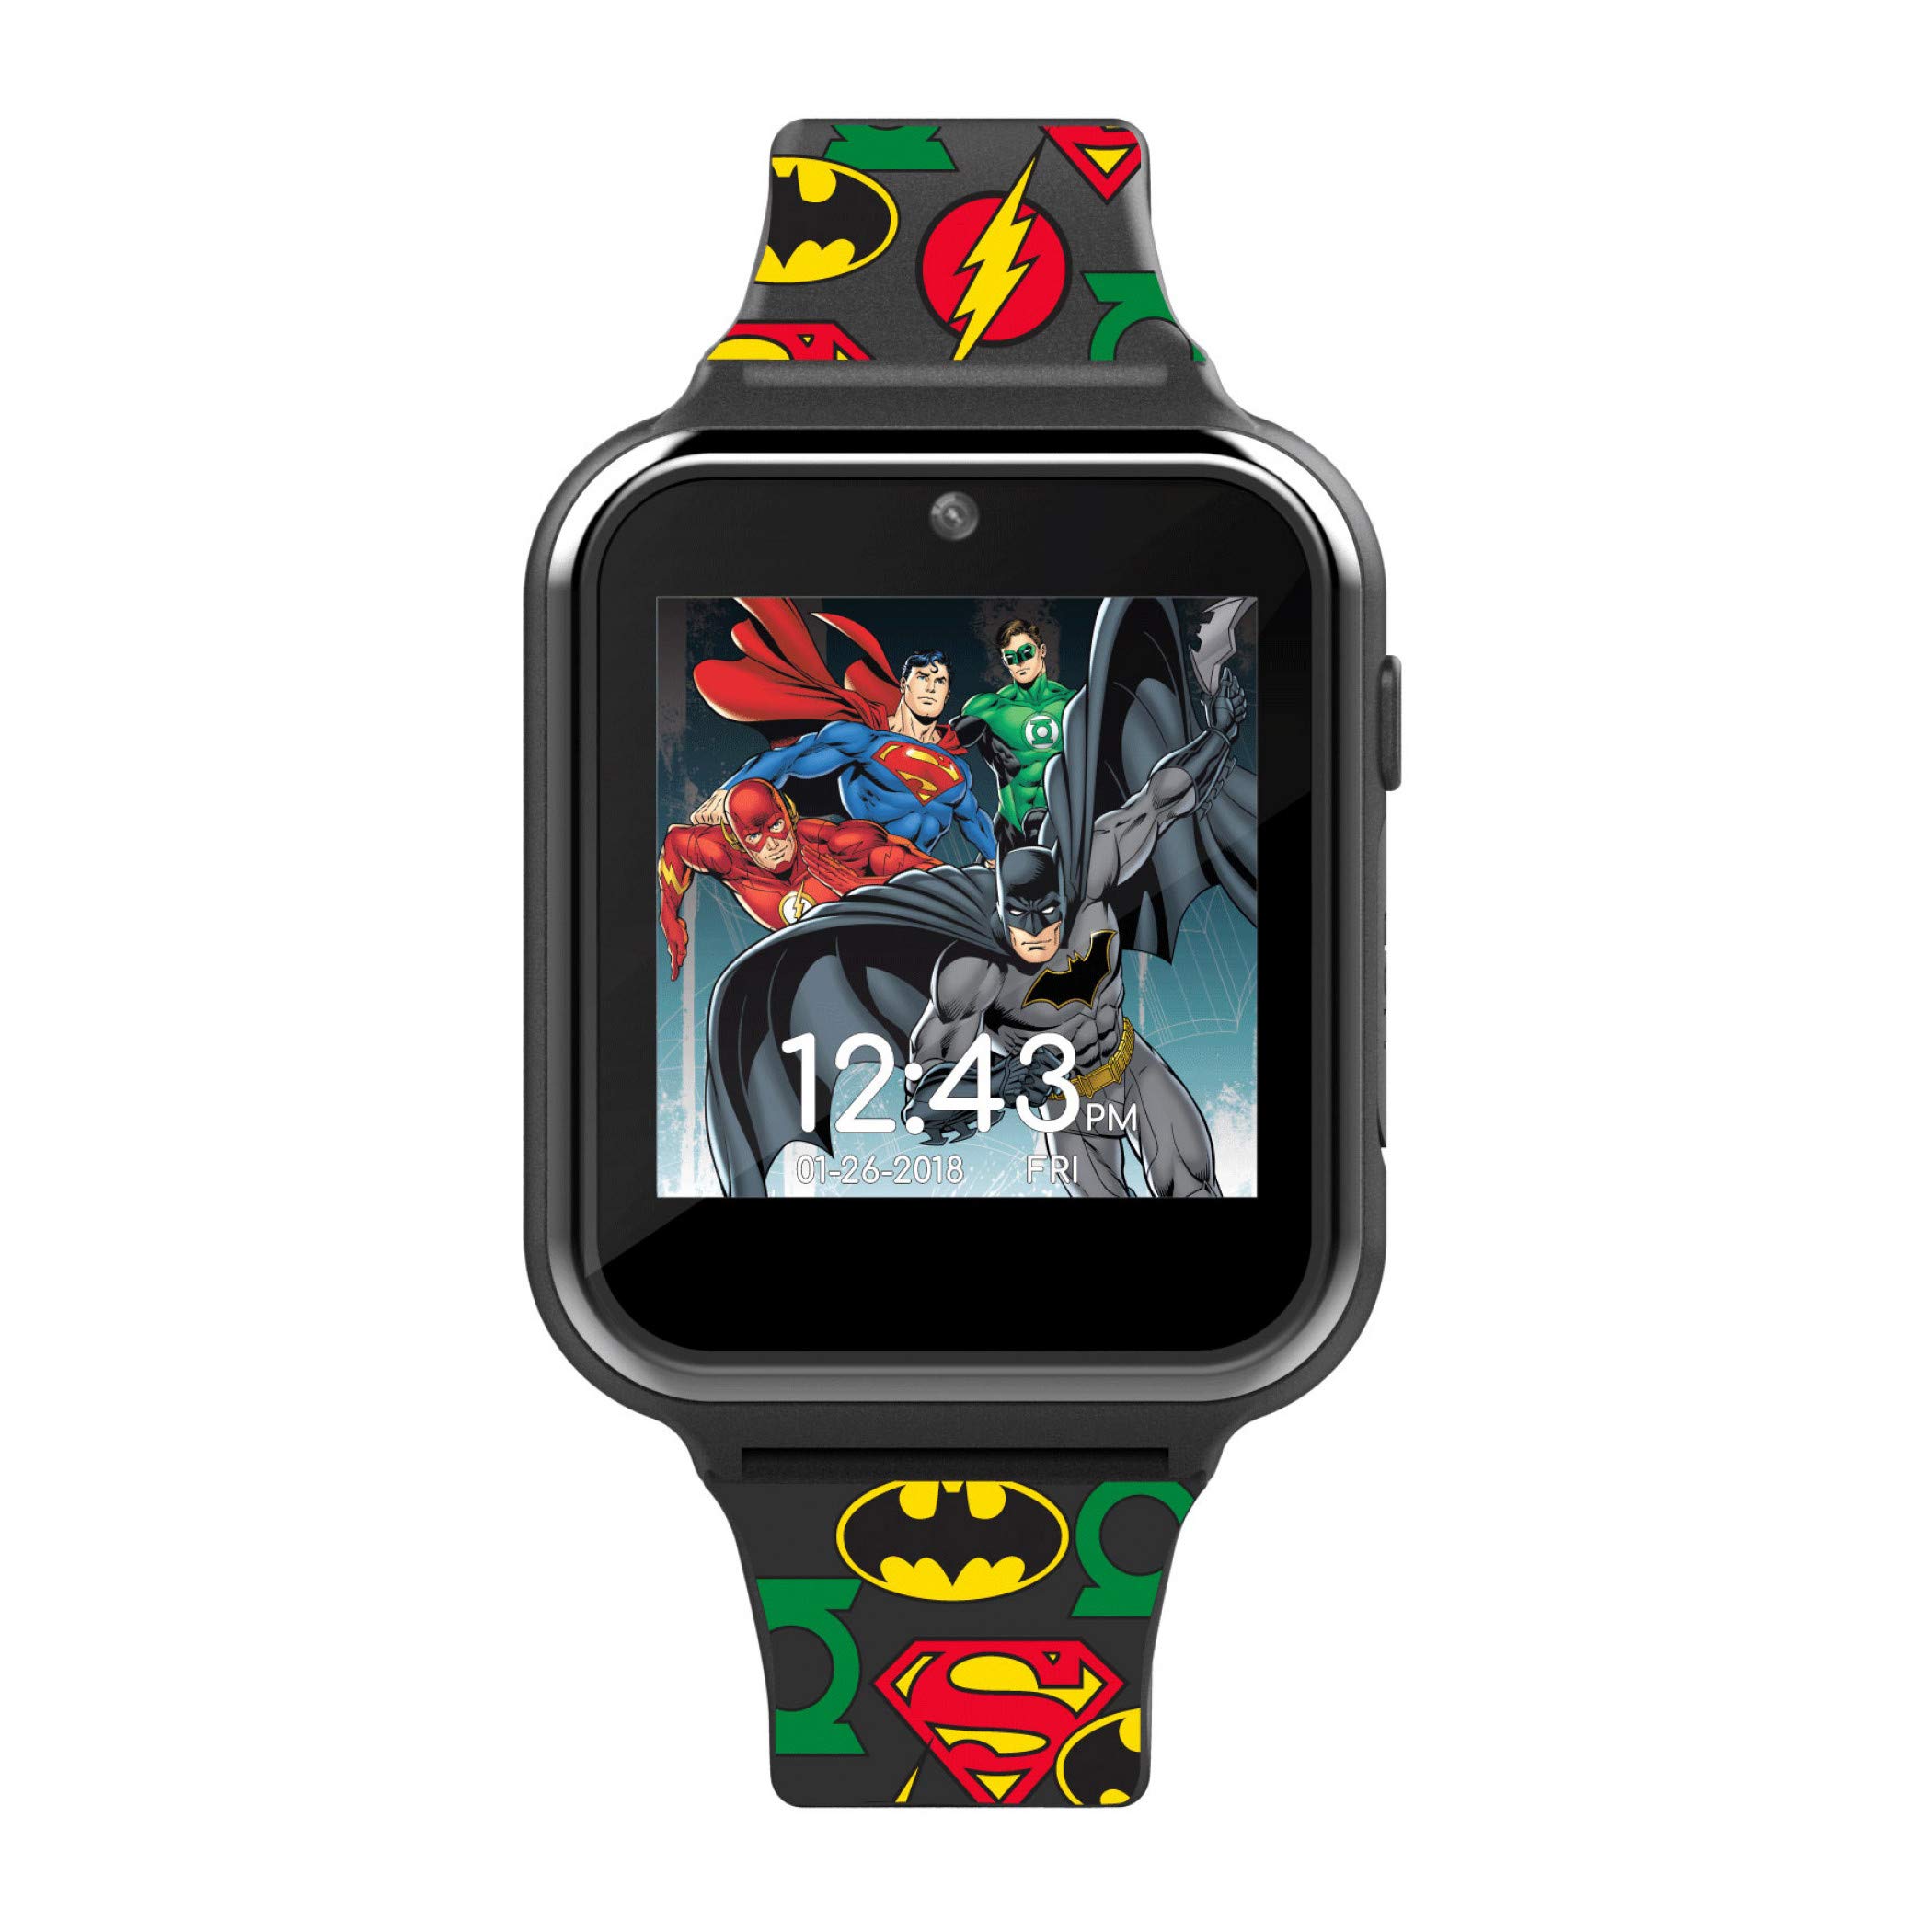 Accutime Kids DC Comics Justice League Black Educational Learning Touchscreen Smart Watch Toy for Boys, Girls, Toddlers - Selfie Cam, Learning Games, Alarm, Calculator, Pedometer (Model: JL4072AZ)